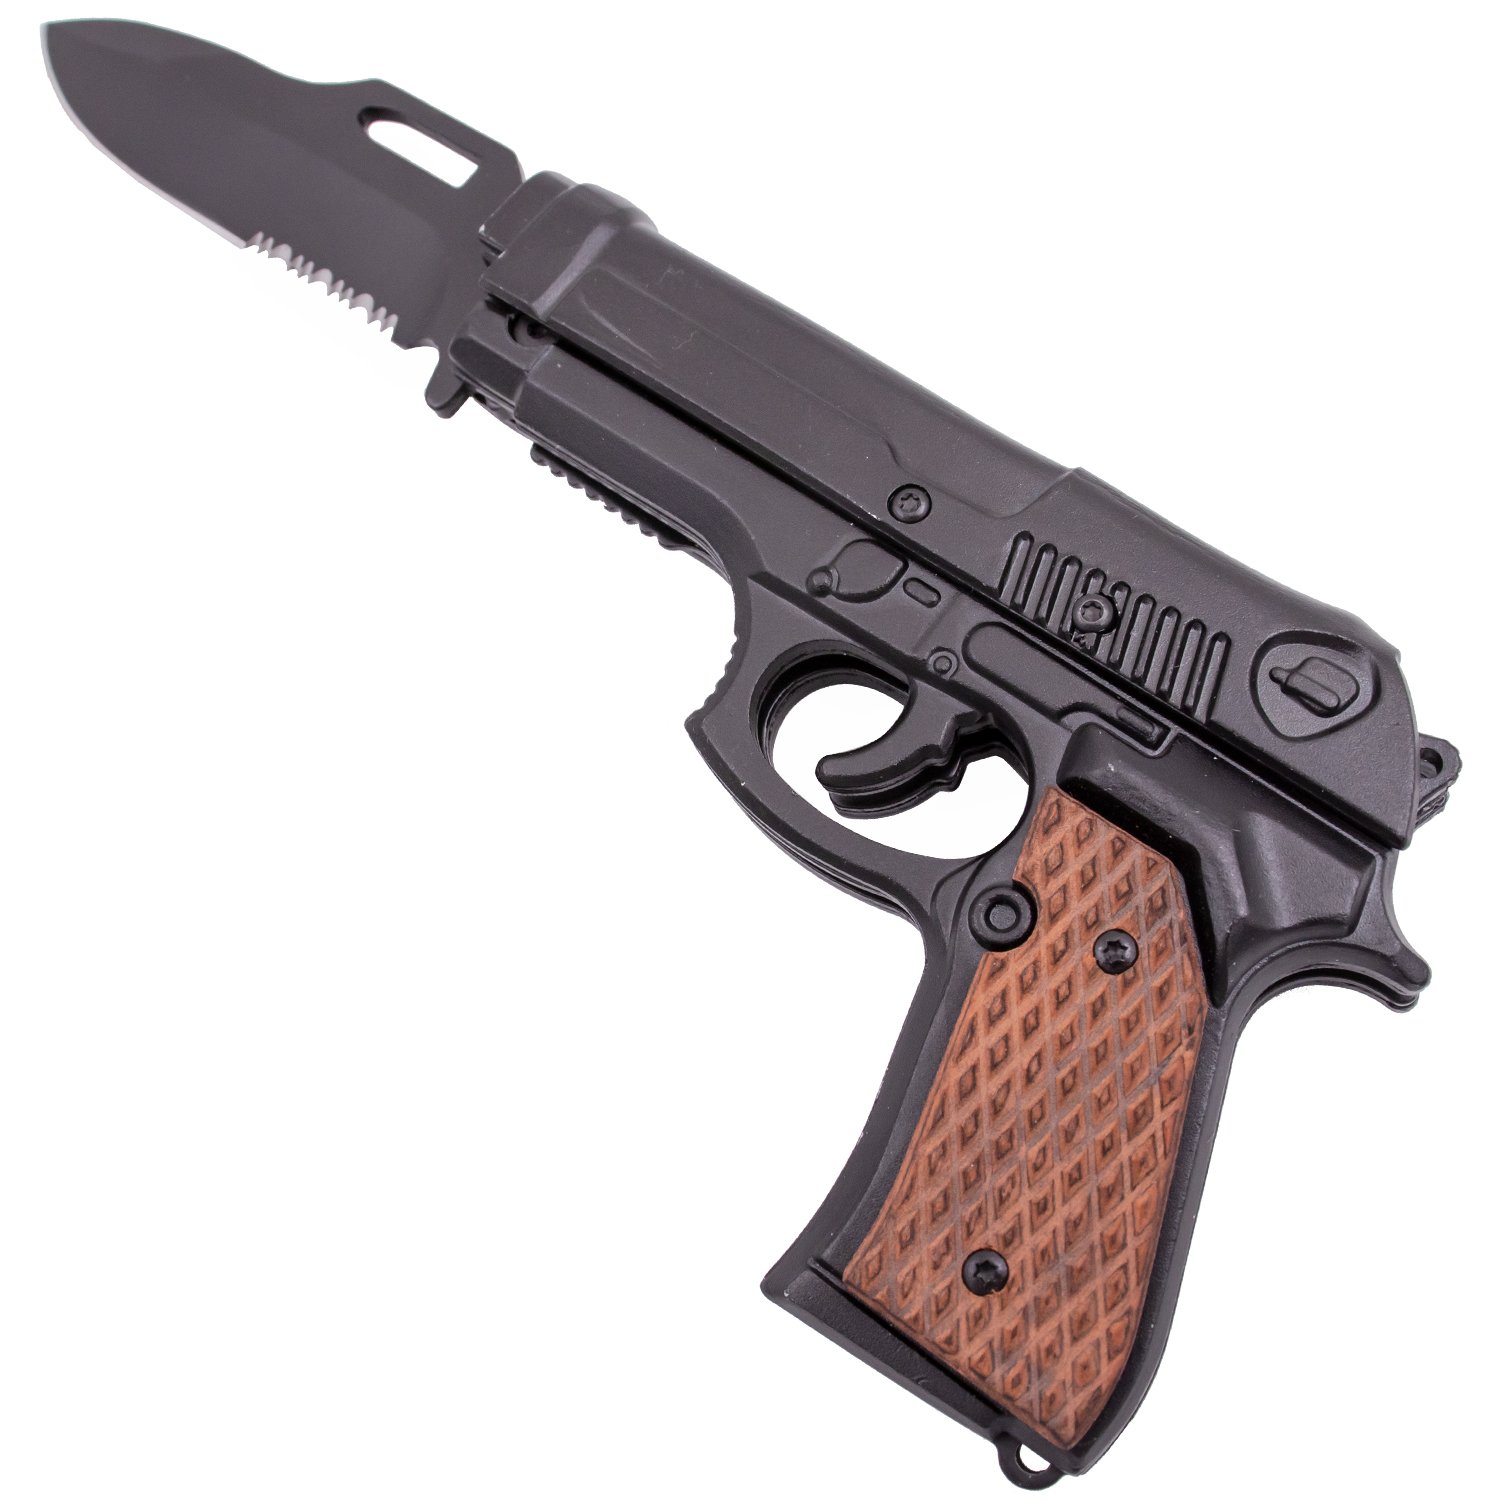 Tiger USA Lock, Stock and Cock Back Pistol Spring Assisted Knife Picture 1